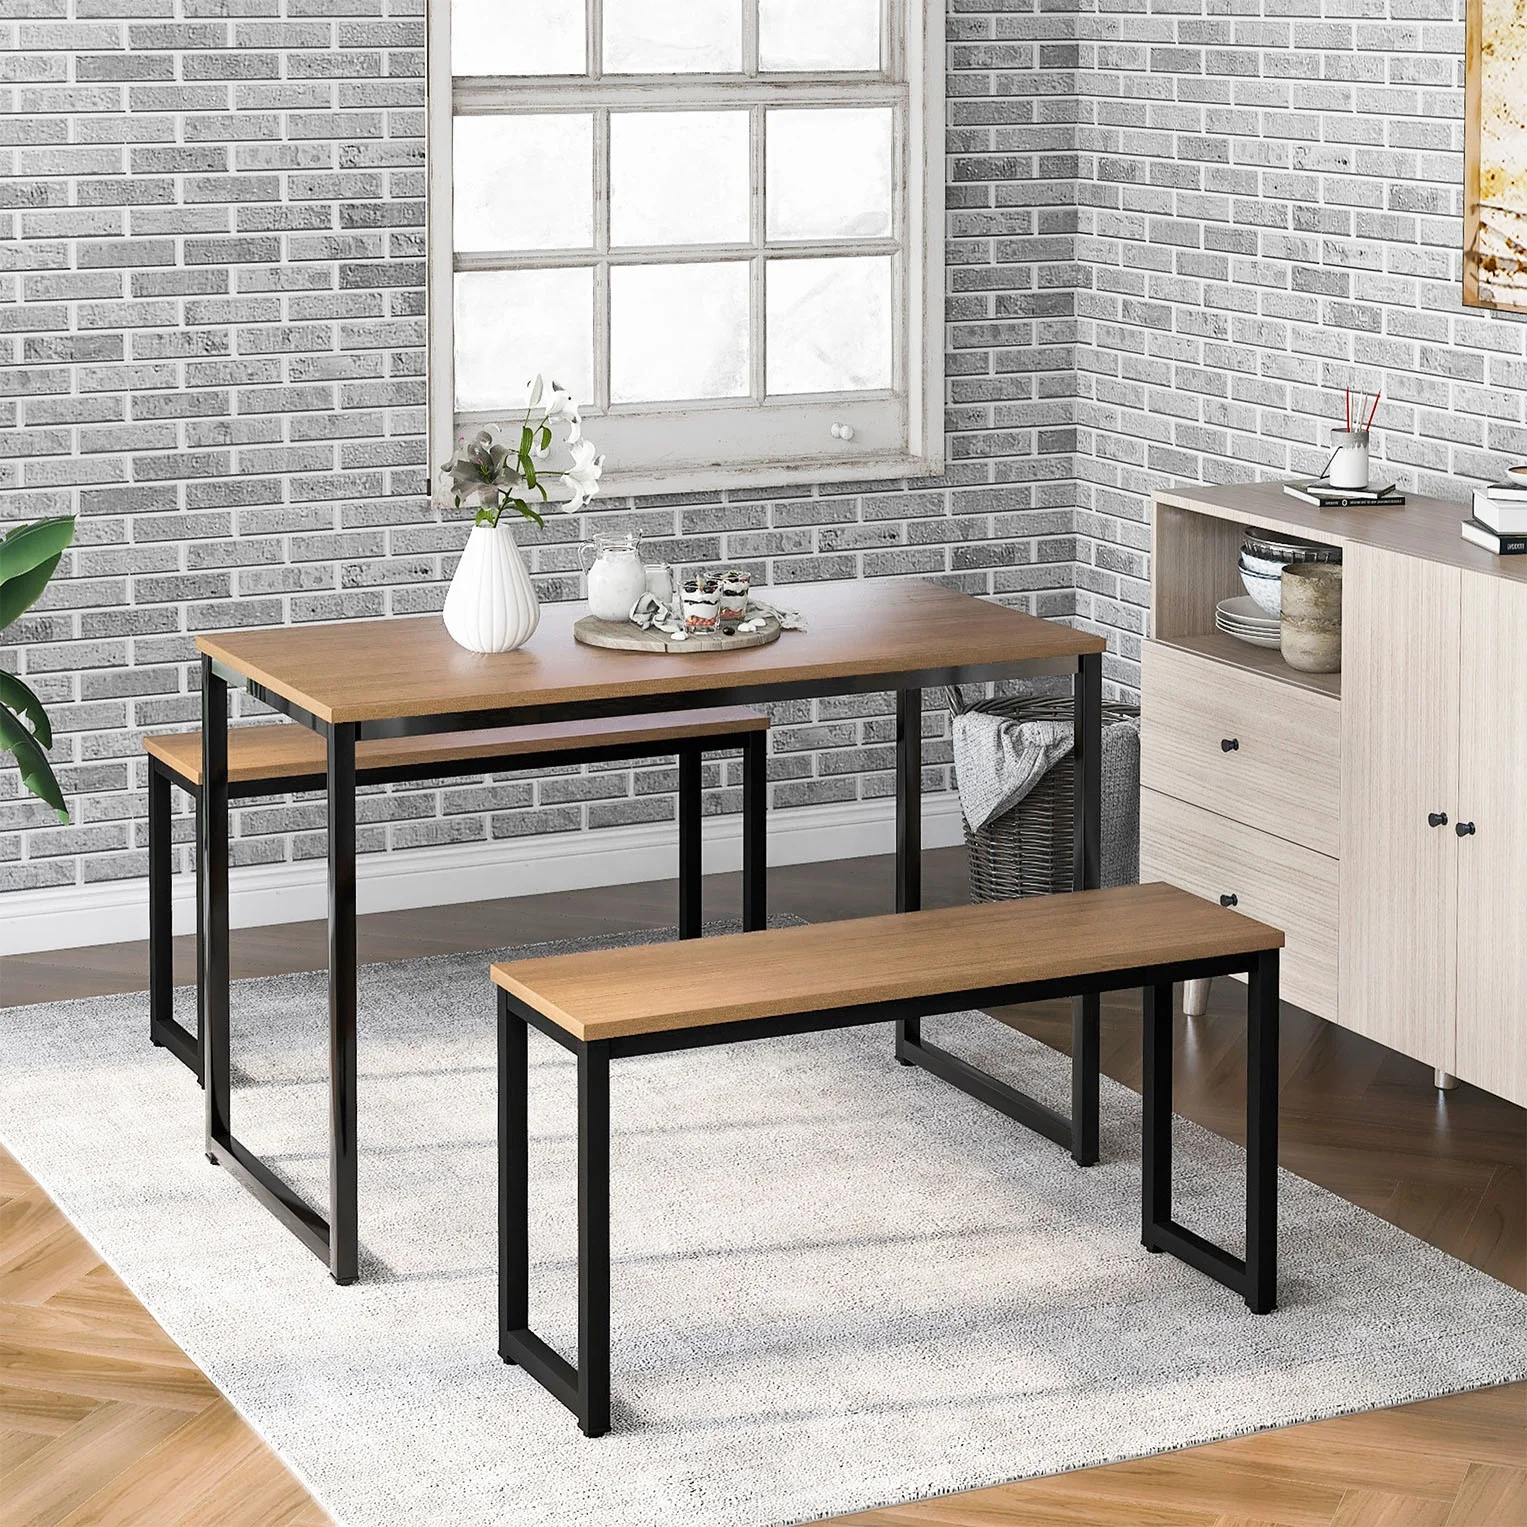 Wooden Dining Table And Bench Set - Dining Table With Bench Buy Dining Table With Bench Online At Best Prices In India Flipkart Com / Plus, design your own dining table as part of our designed by you collection.